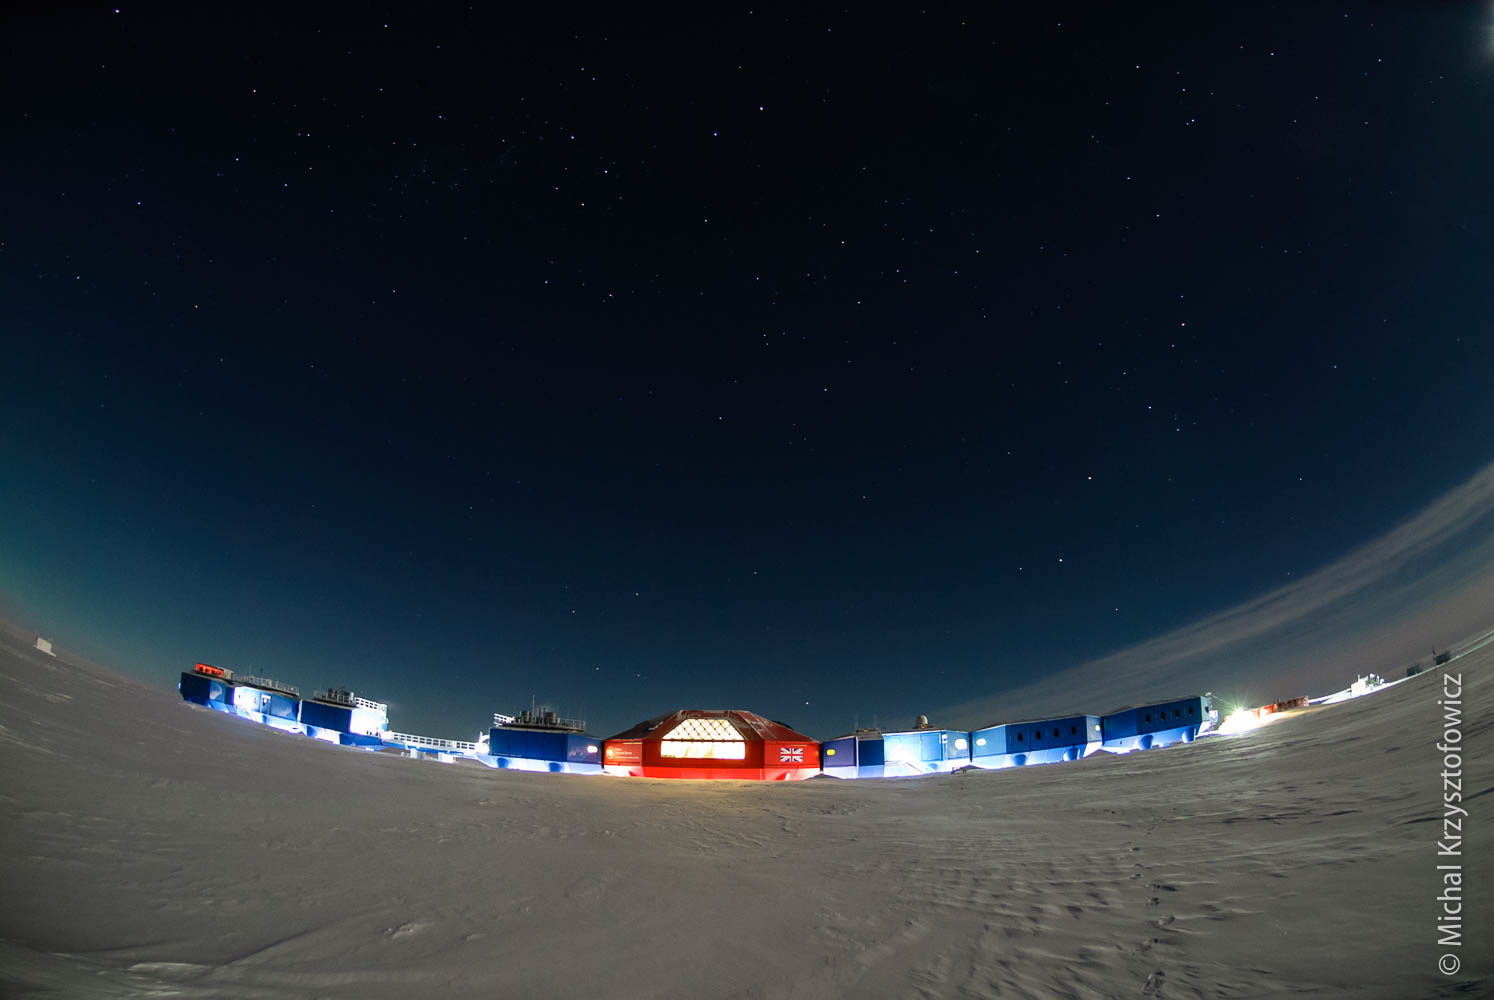 Halley VI Station in the Full Moon's light